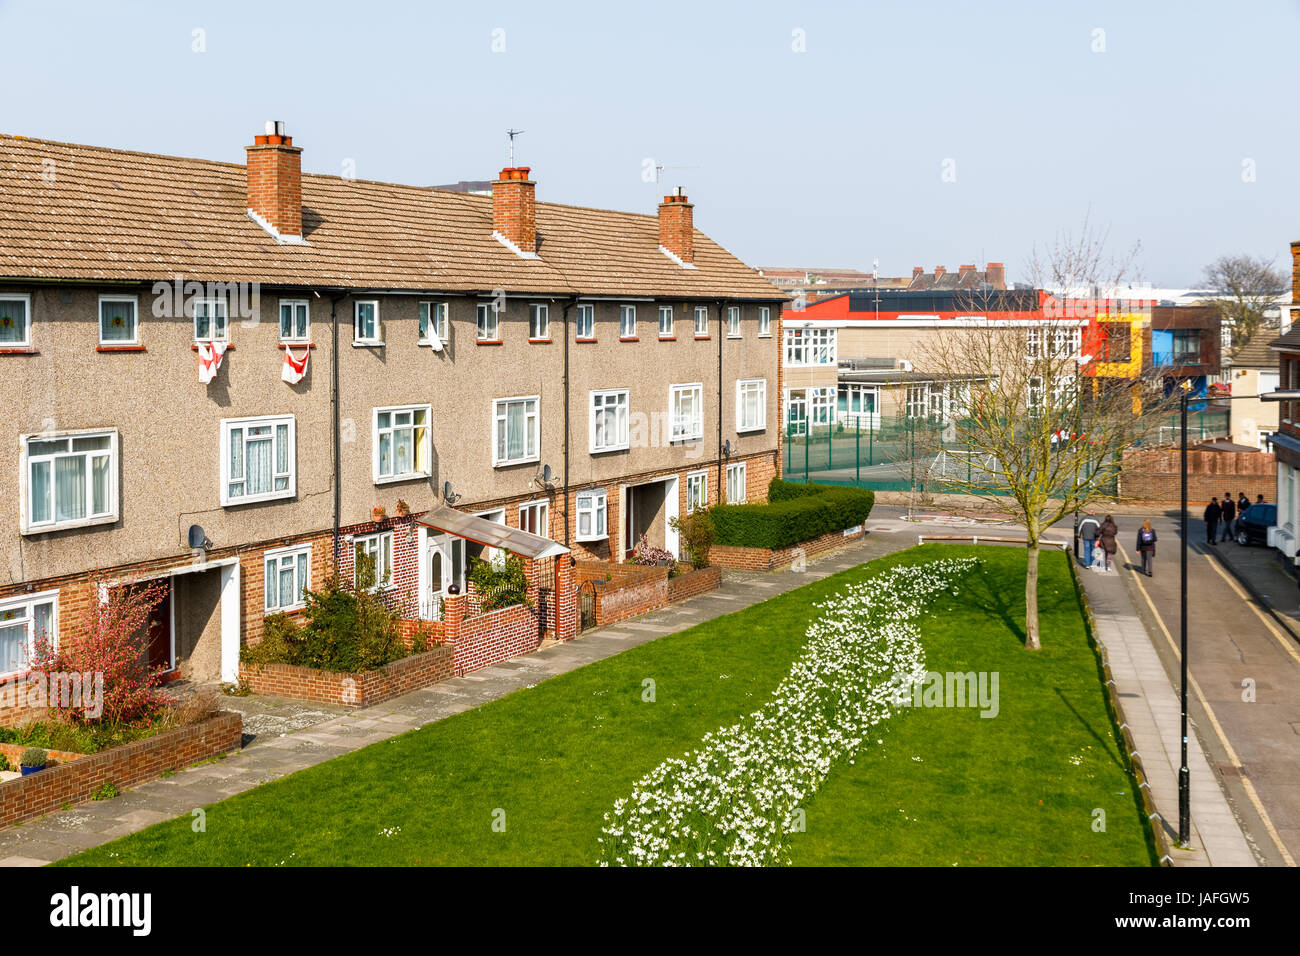 Forecourt of a council housing block in the UK Stock Photo